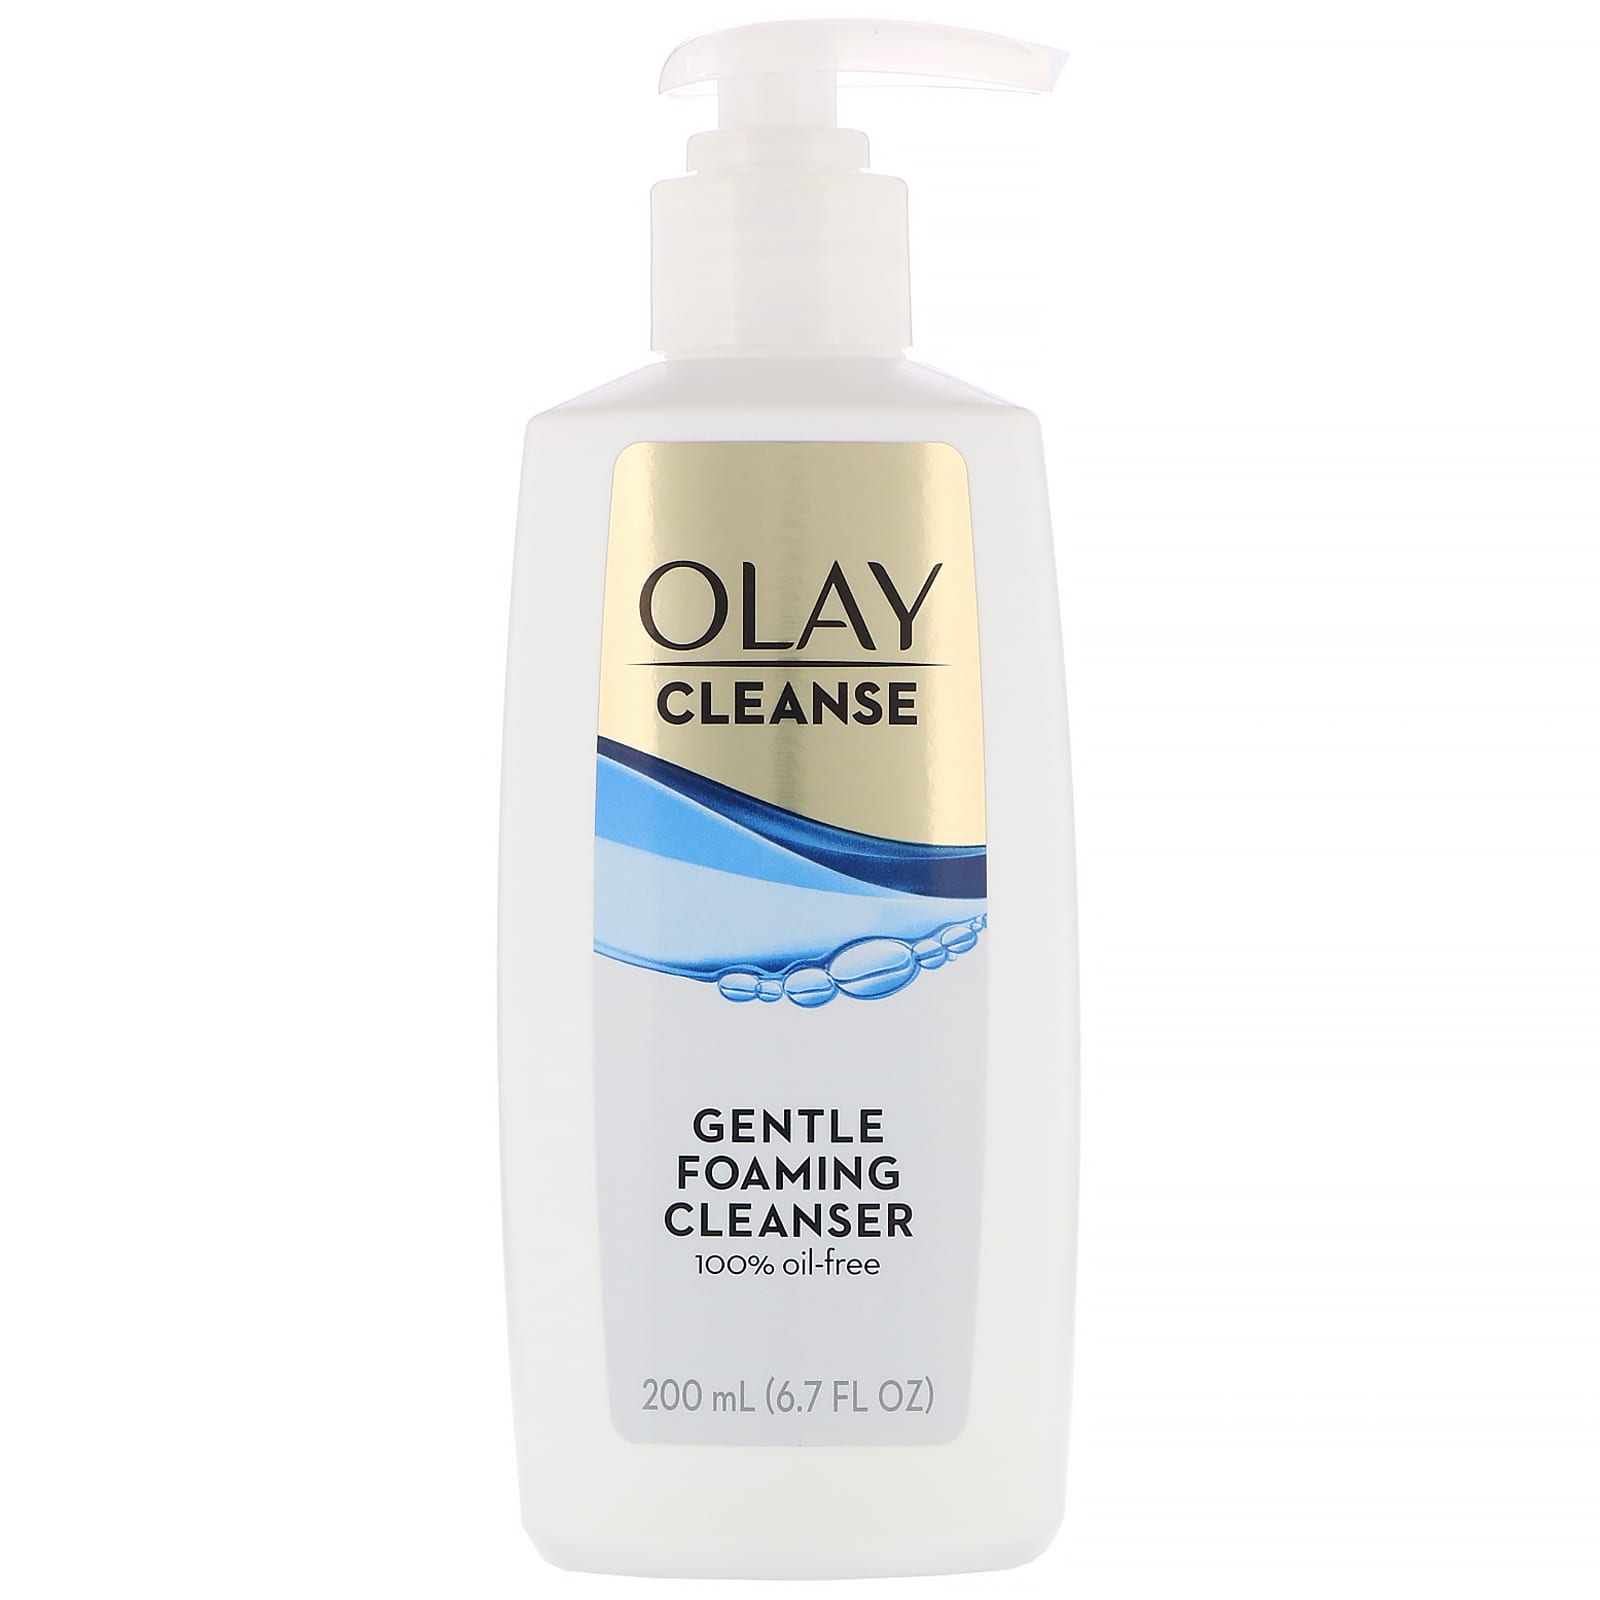 Olay, Cleanse, Gentle Foaming Cleanser (200 ml)